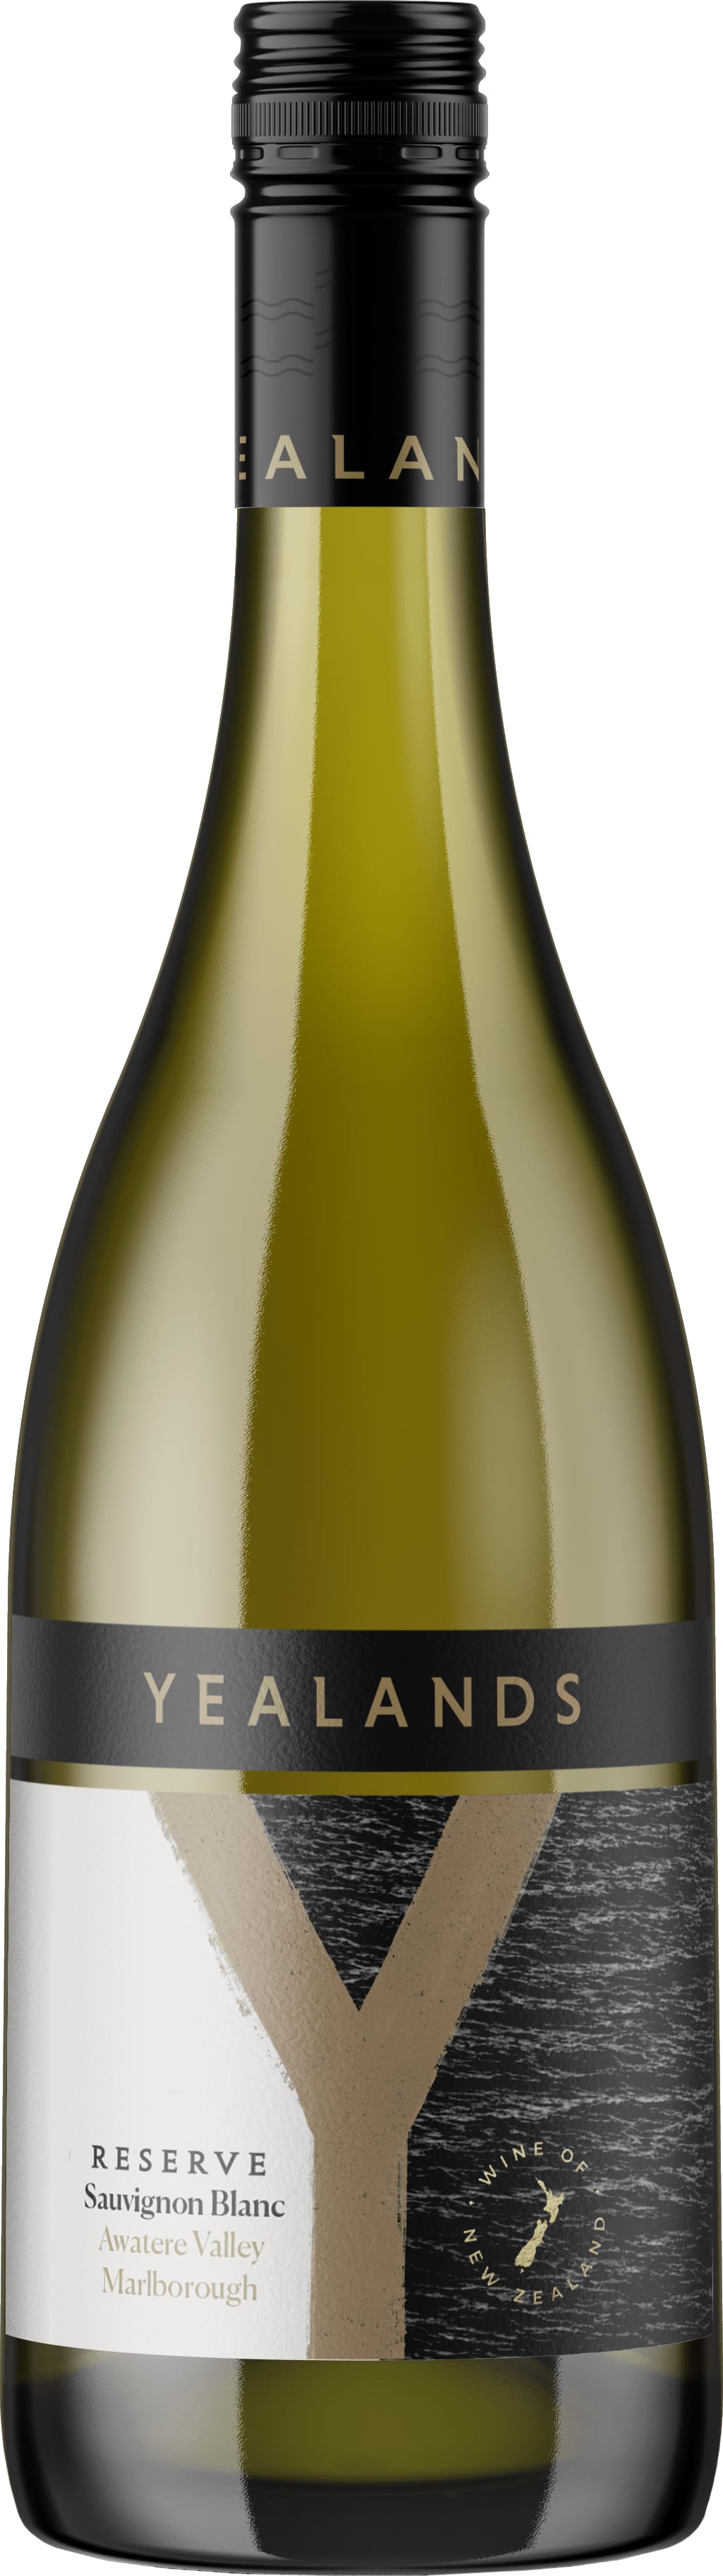 Yealands Reserve Sauvignon Blanc 22 Yealands 75cl - Buy Yealands Estate Wines from GREAT WINES DIRECT wine shop